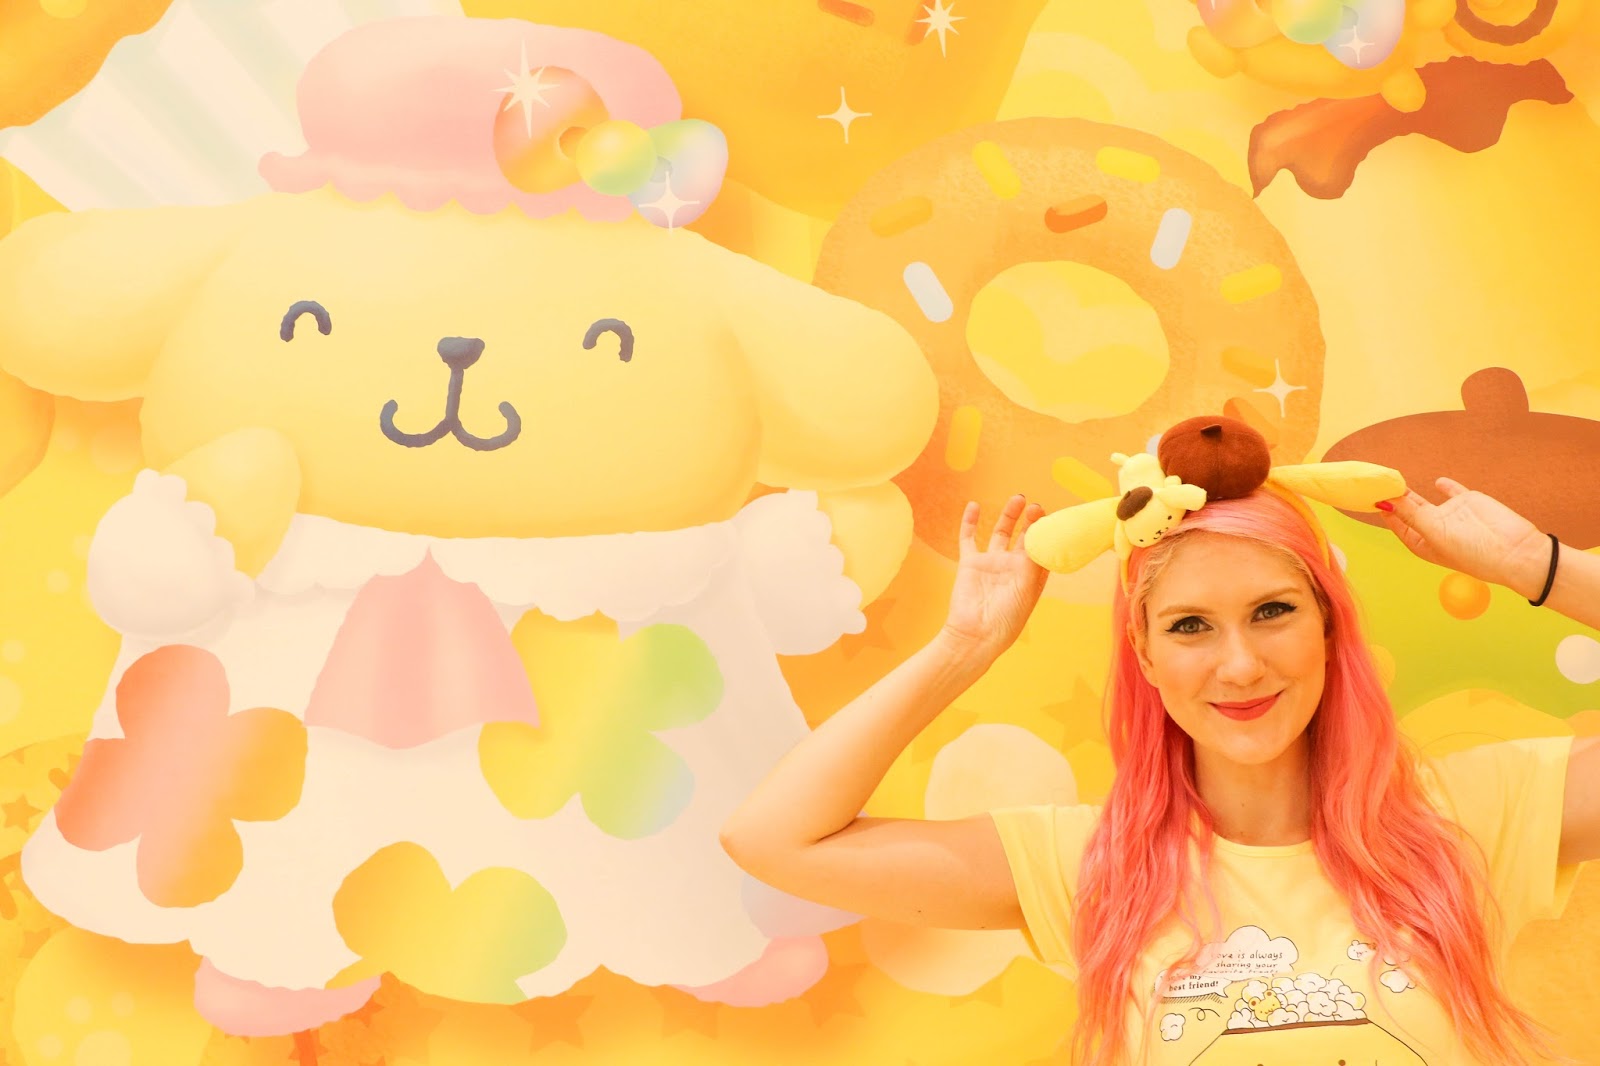 The Ultra kawaii Sanrio Puroland theme park is a must see in Tokyo! Click through for more info and photos